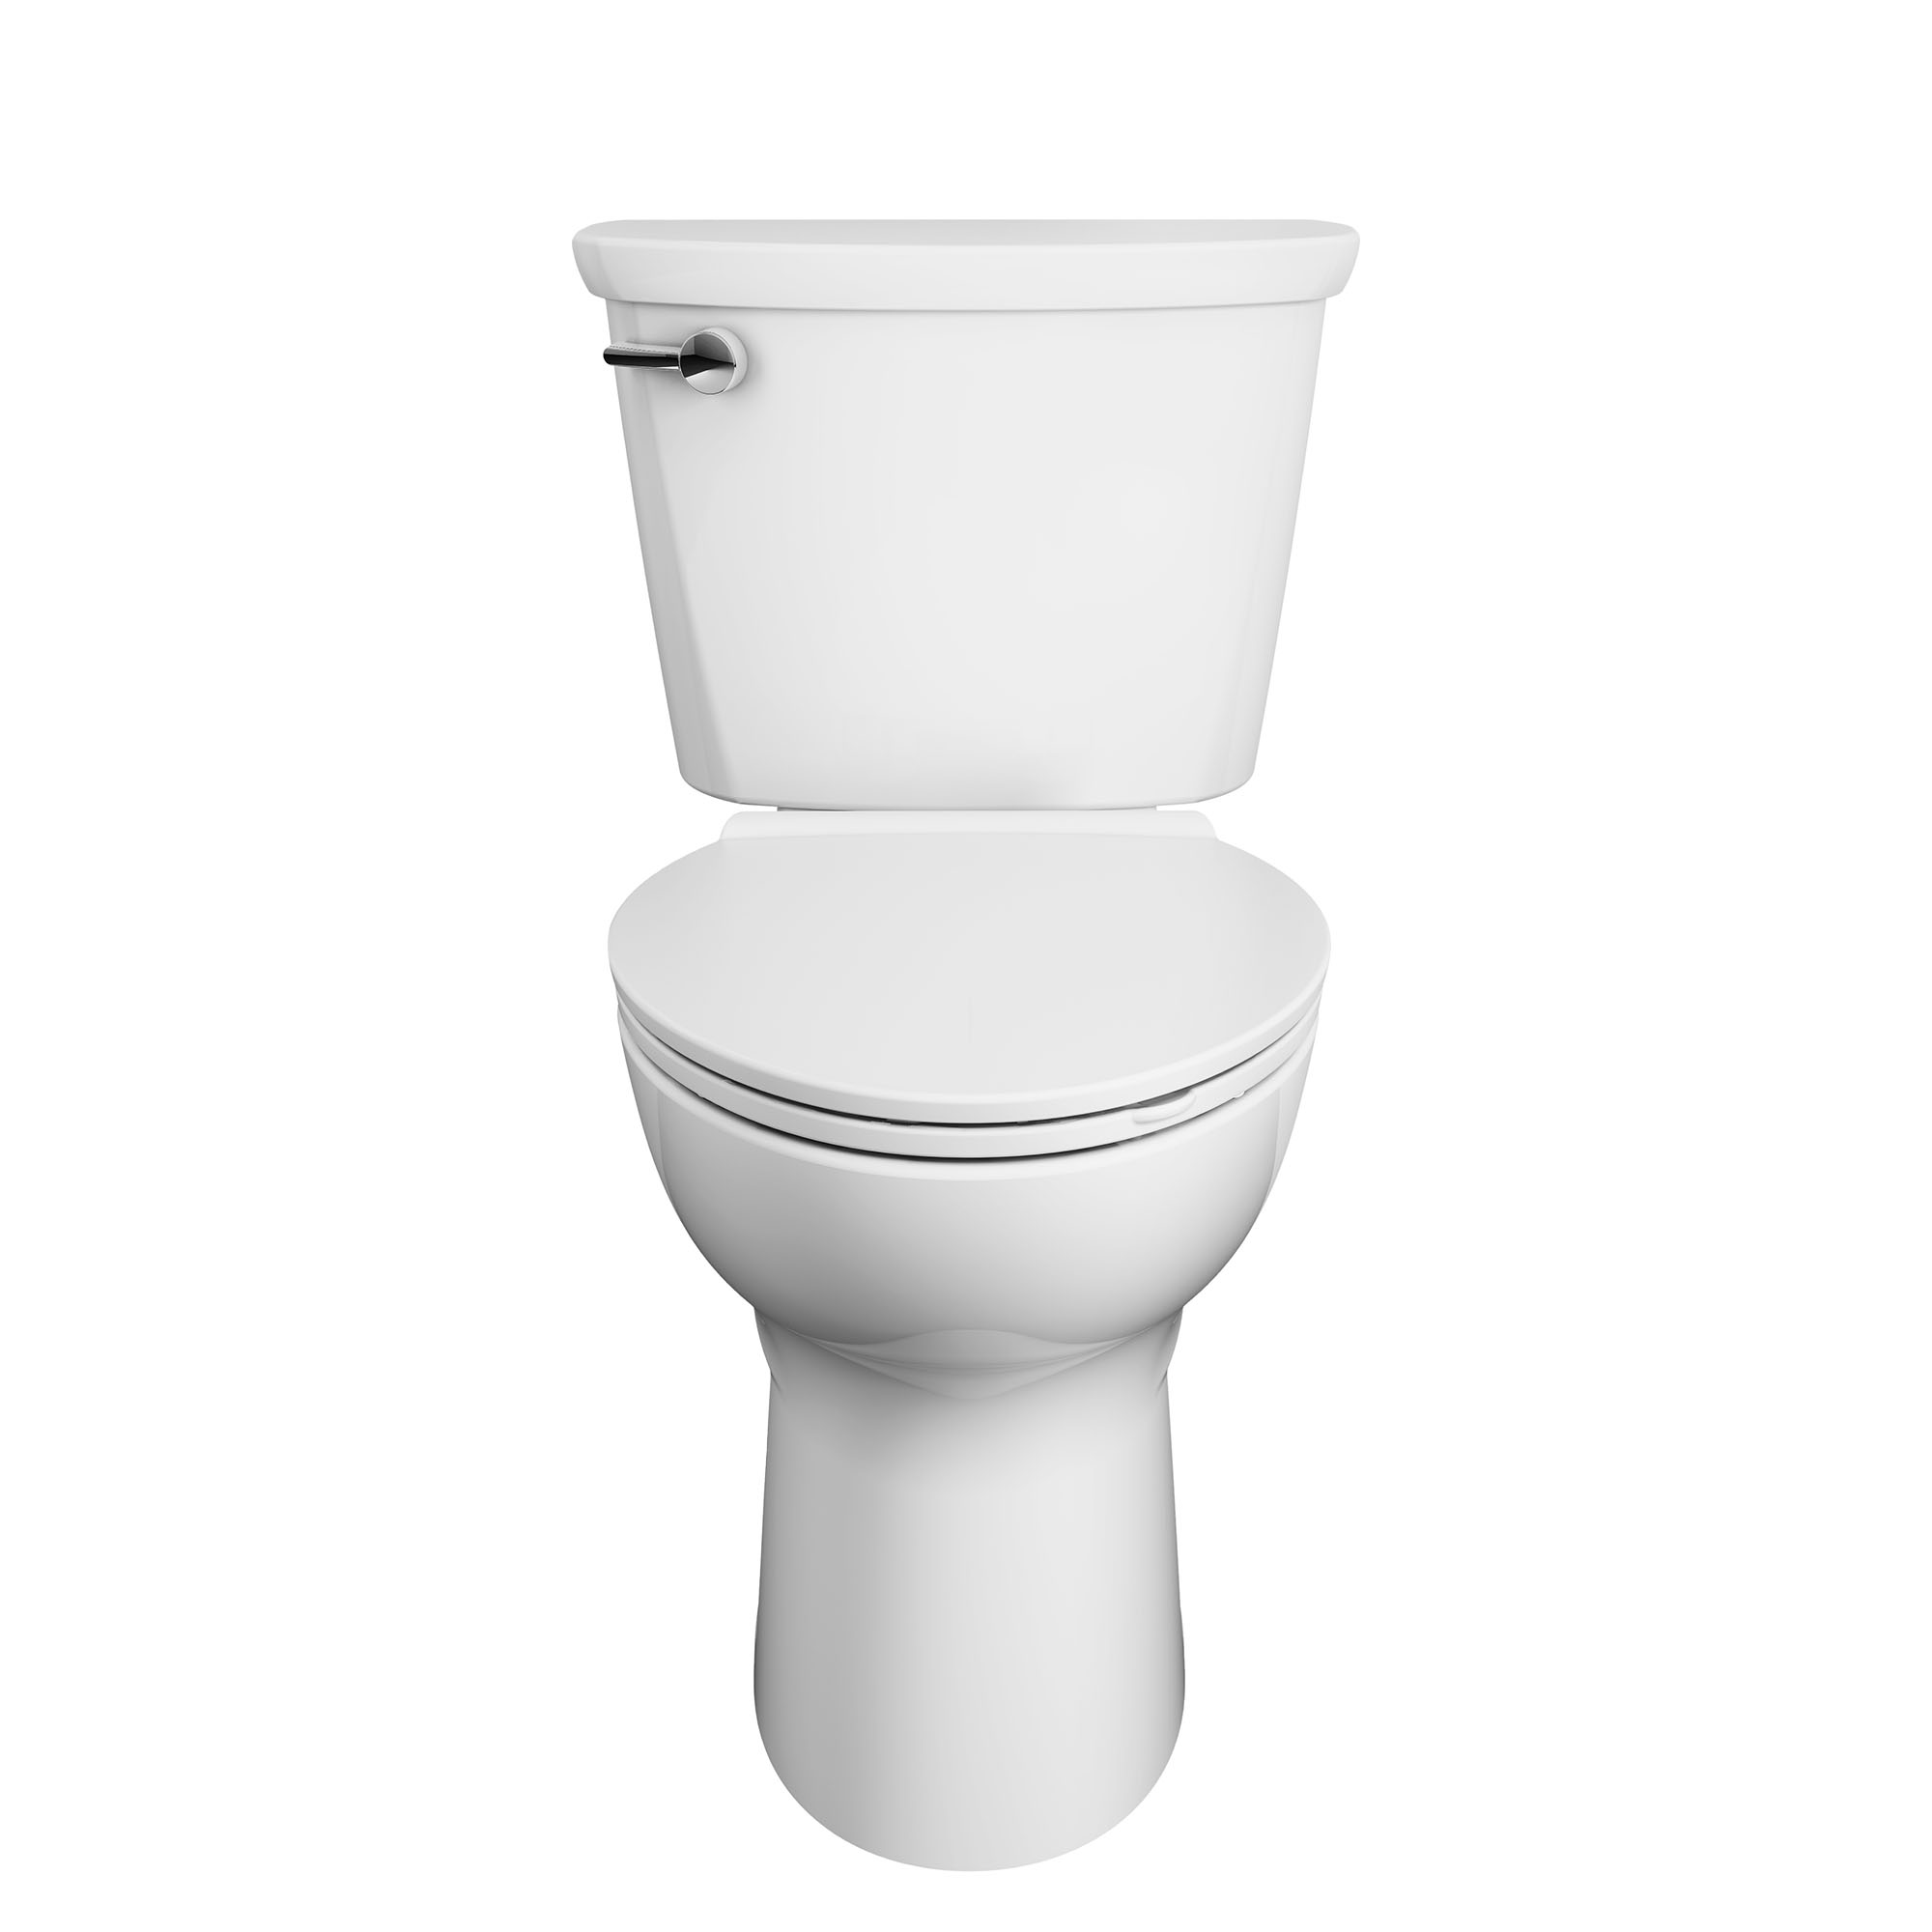 Cadet™ PRO Two-Piece 1.28 gpf/4.8 Lpf Compact Chair Height Elongated Toilet Less Seat